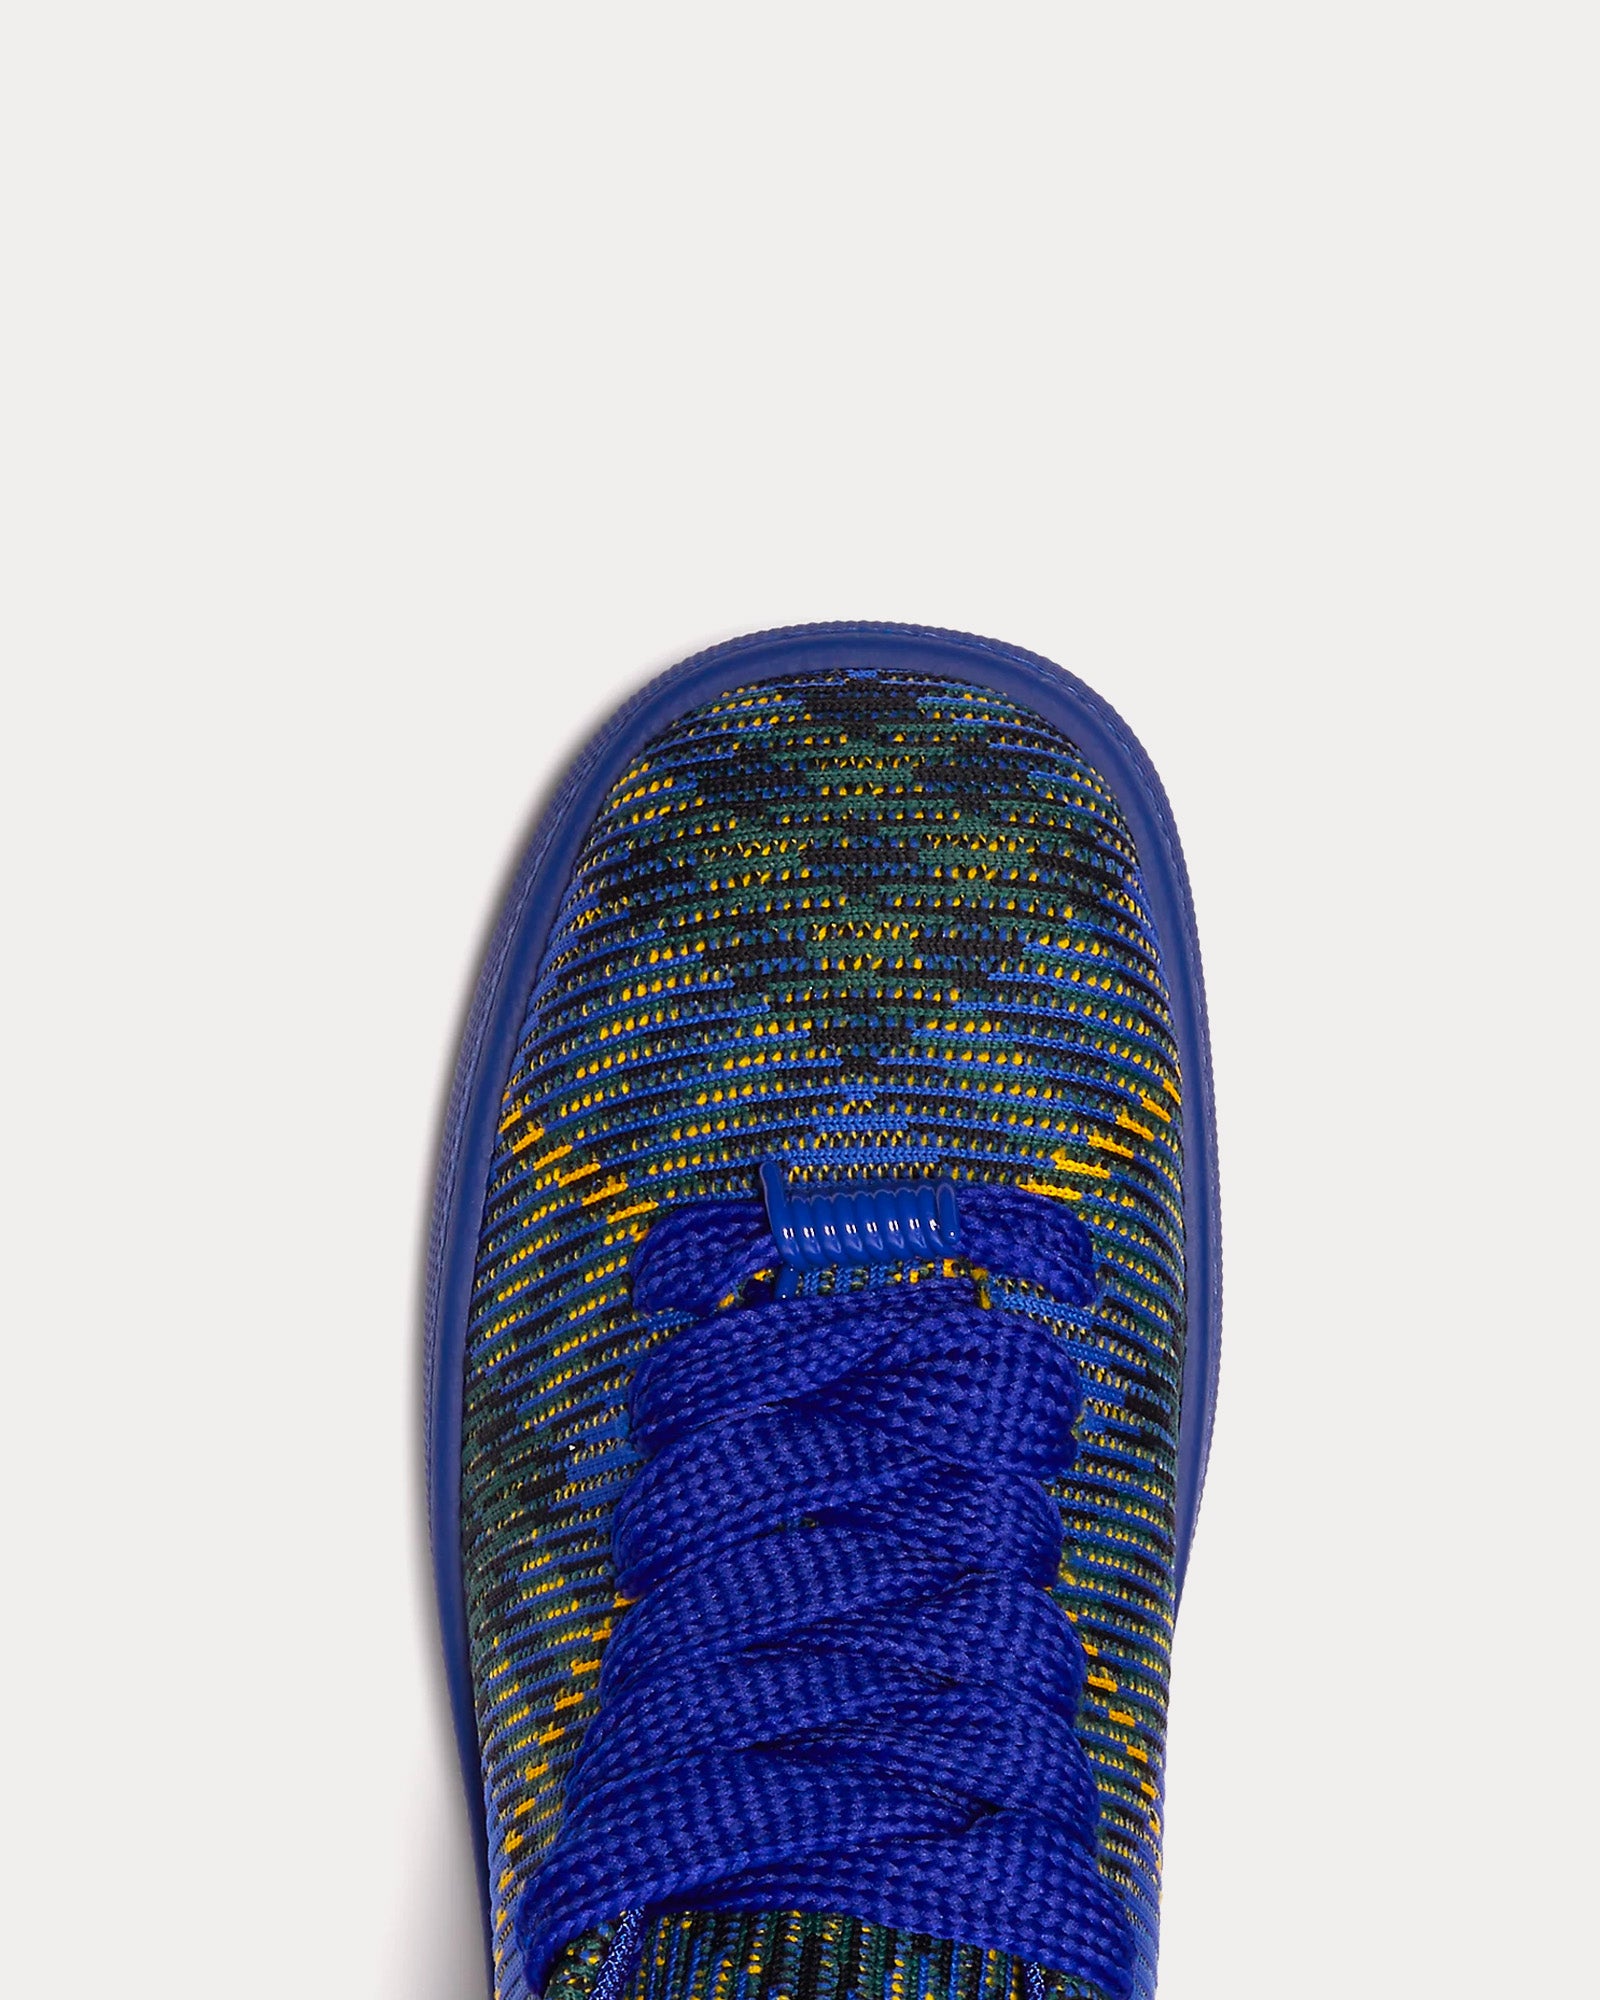 Burberry - Box Check Knit Bright Navy Low Top Sneakers